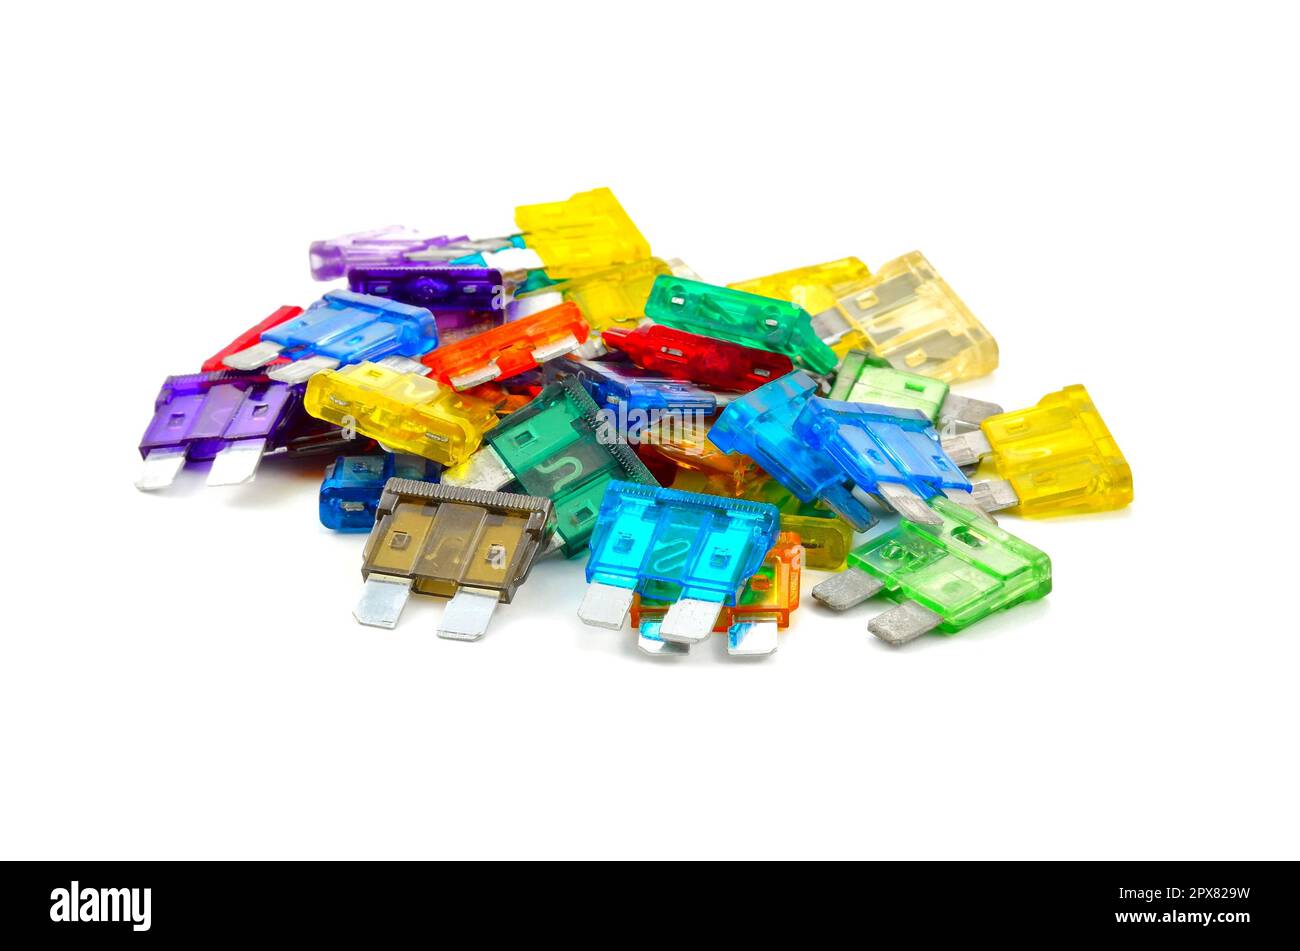 Color car fuse. Pile of colorful electrical automotive fuses or circuit breakers isolated on white background. Stock Photo